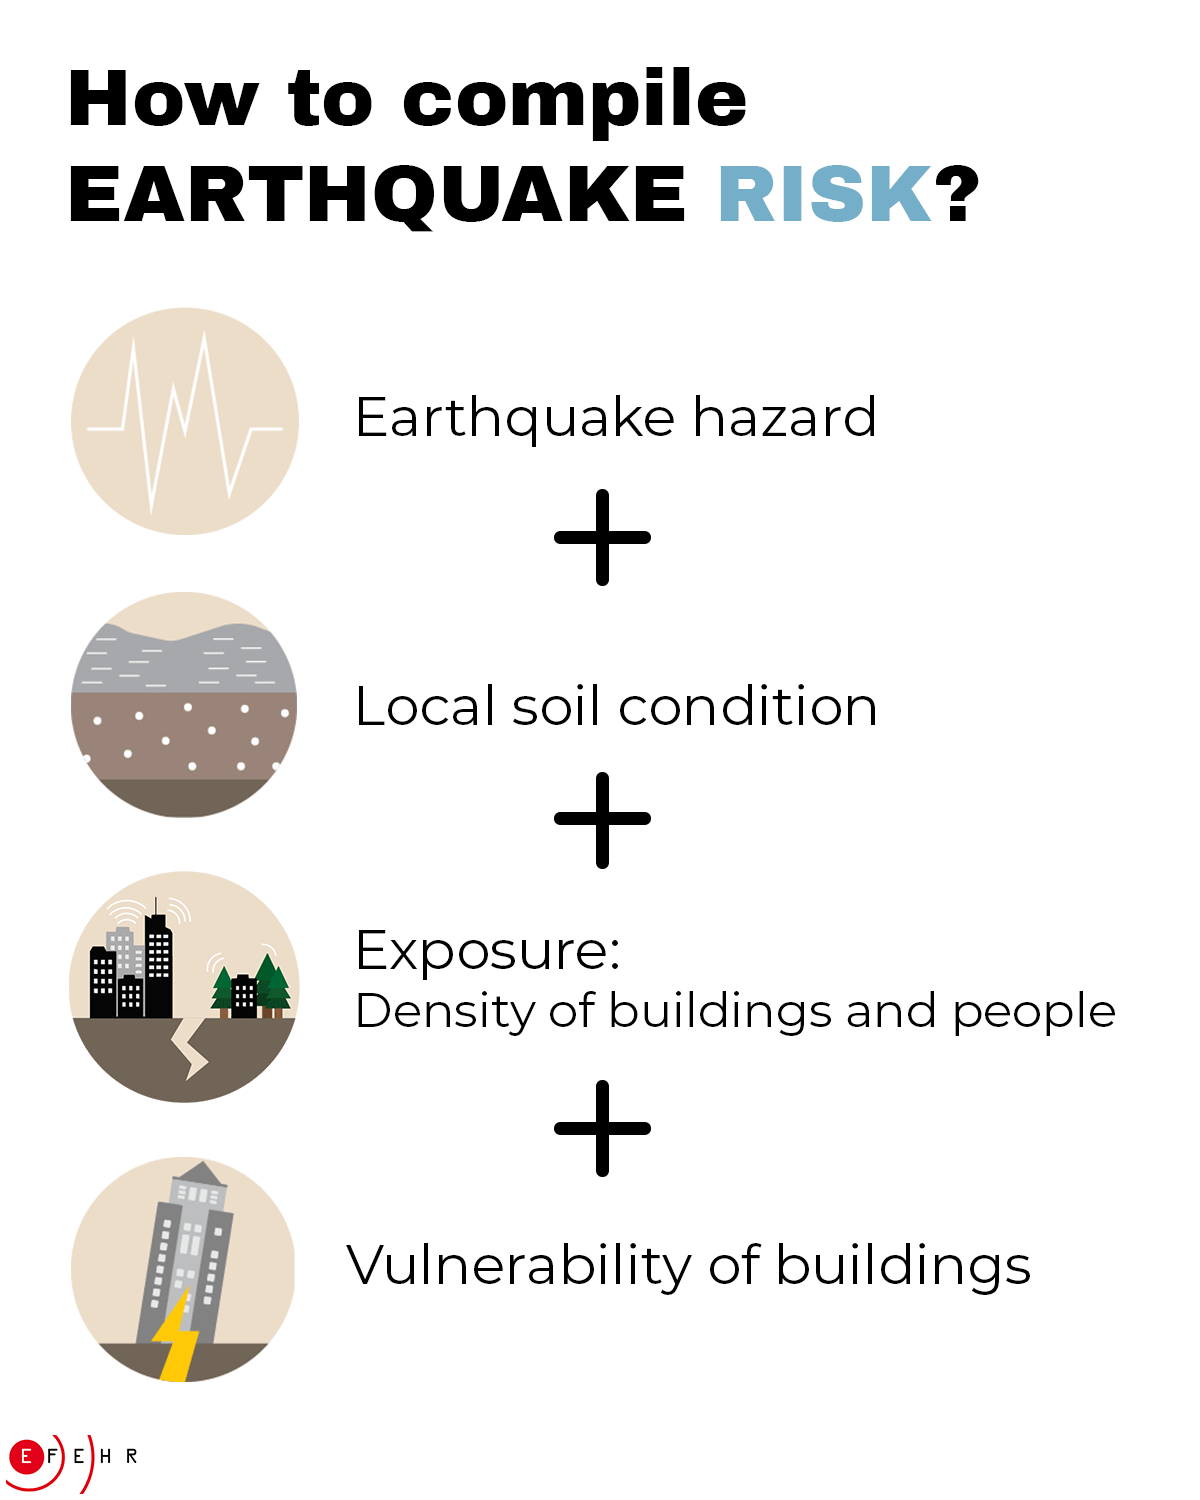 What is earthquake risk?